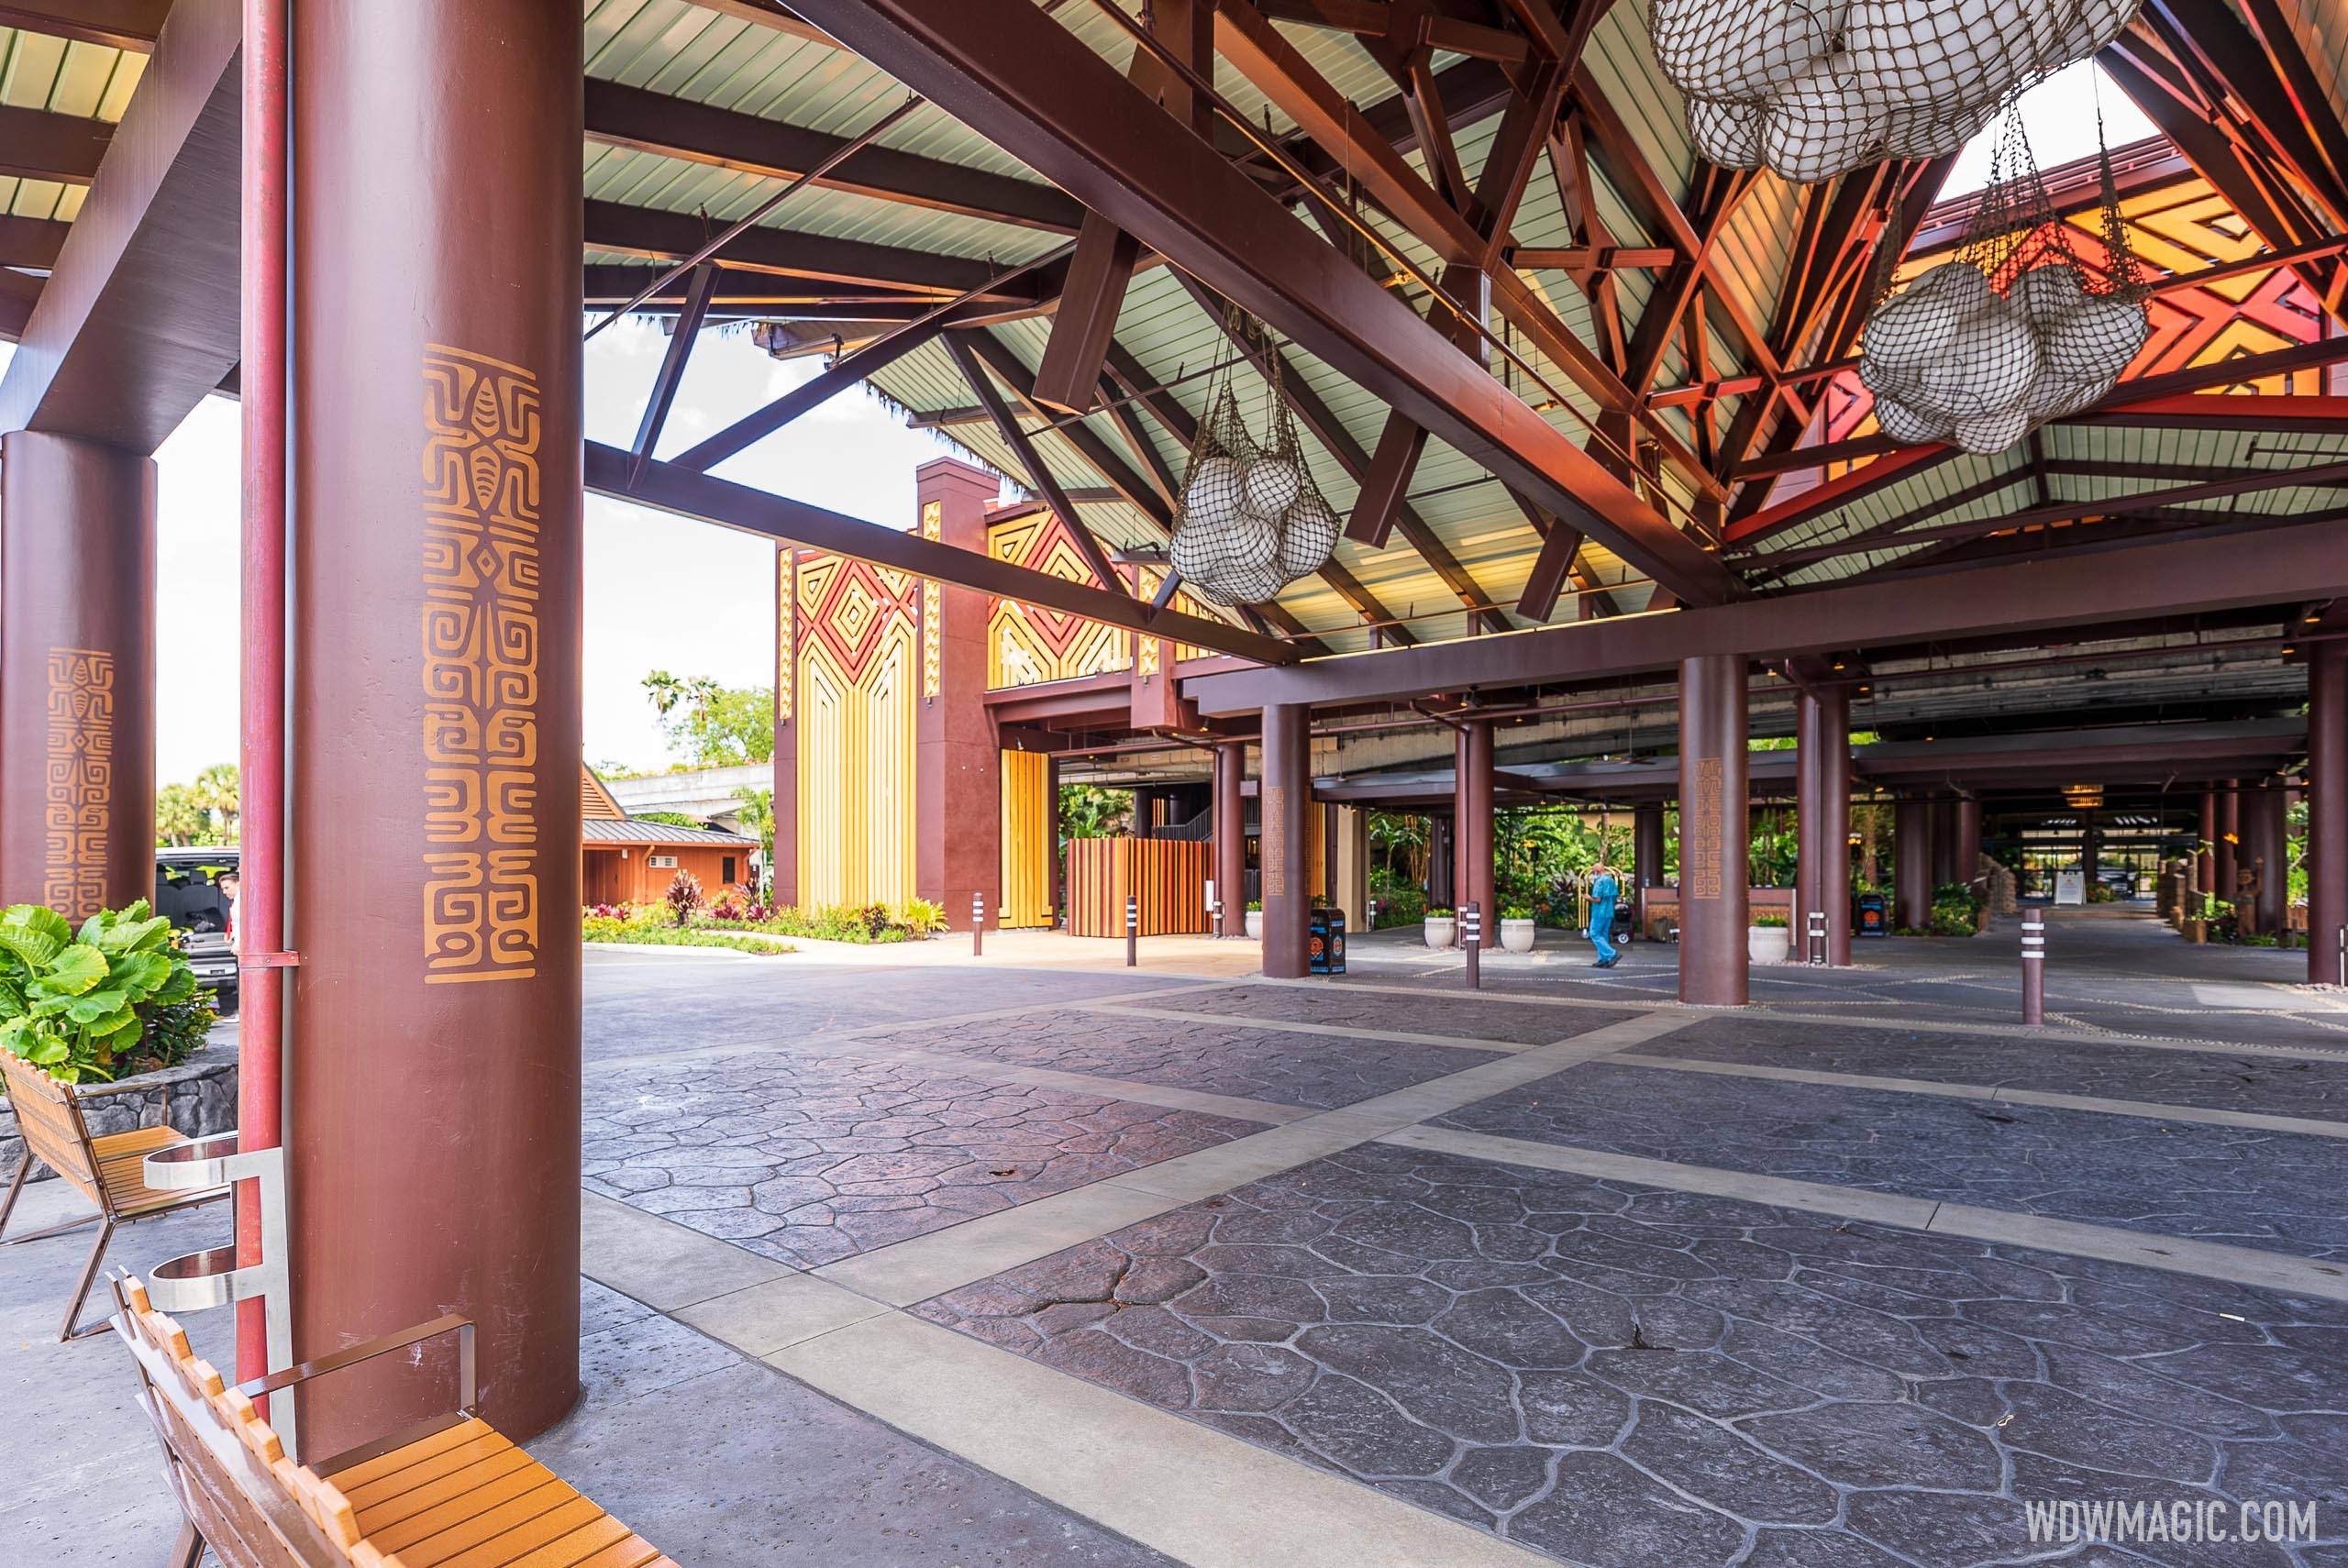 More details come to the Porte Cochere at Disney's Polynesian Village Resort